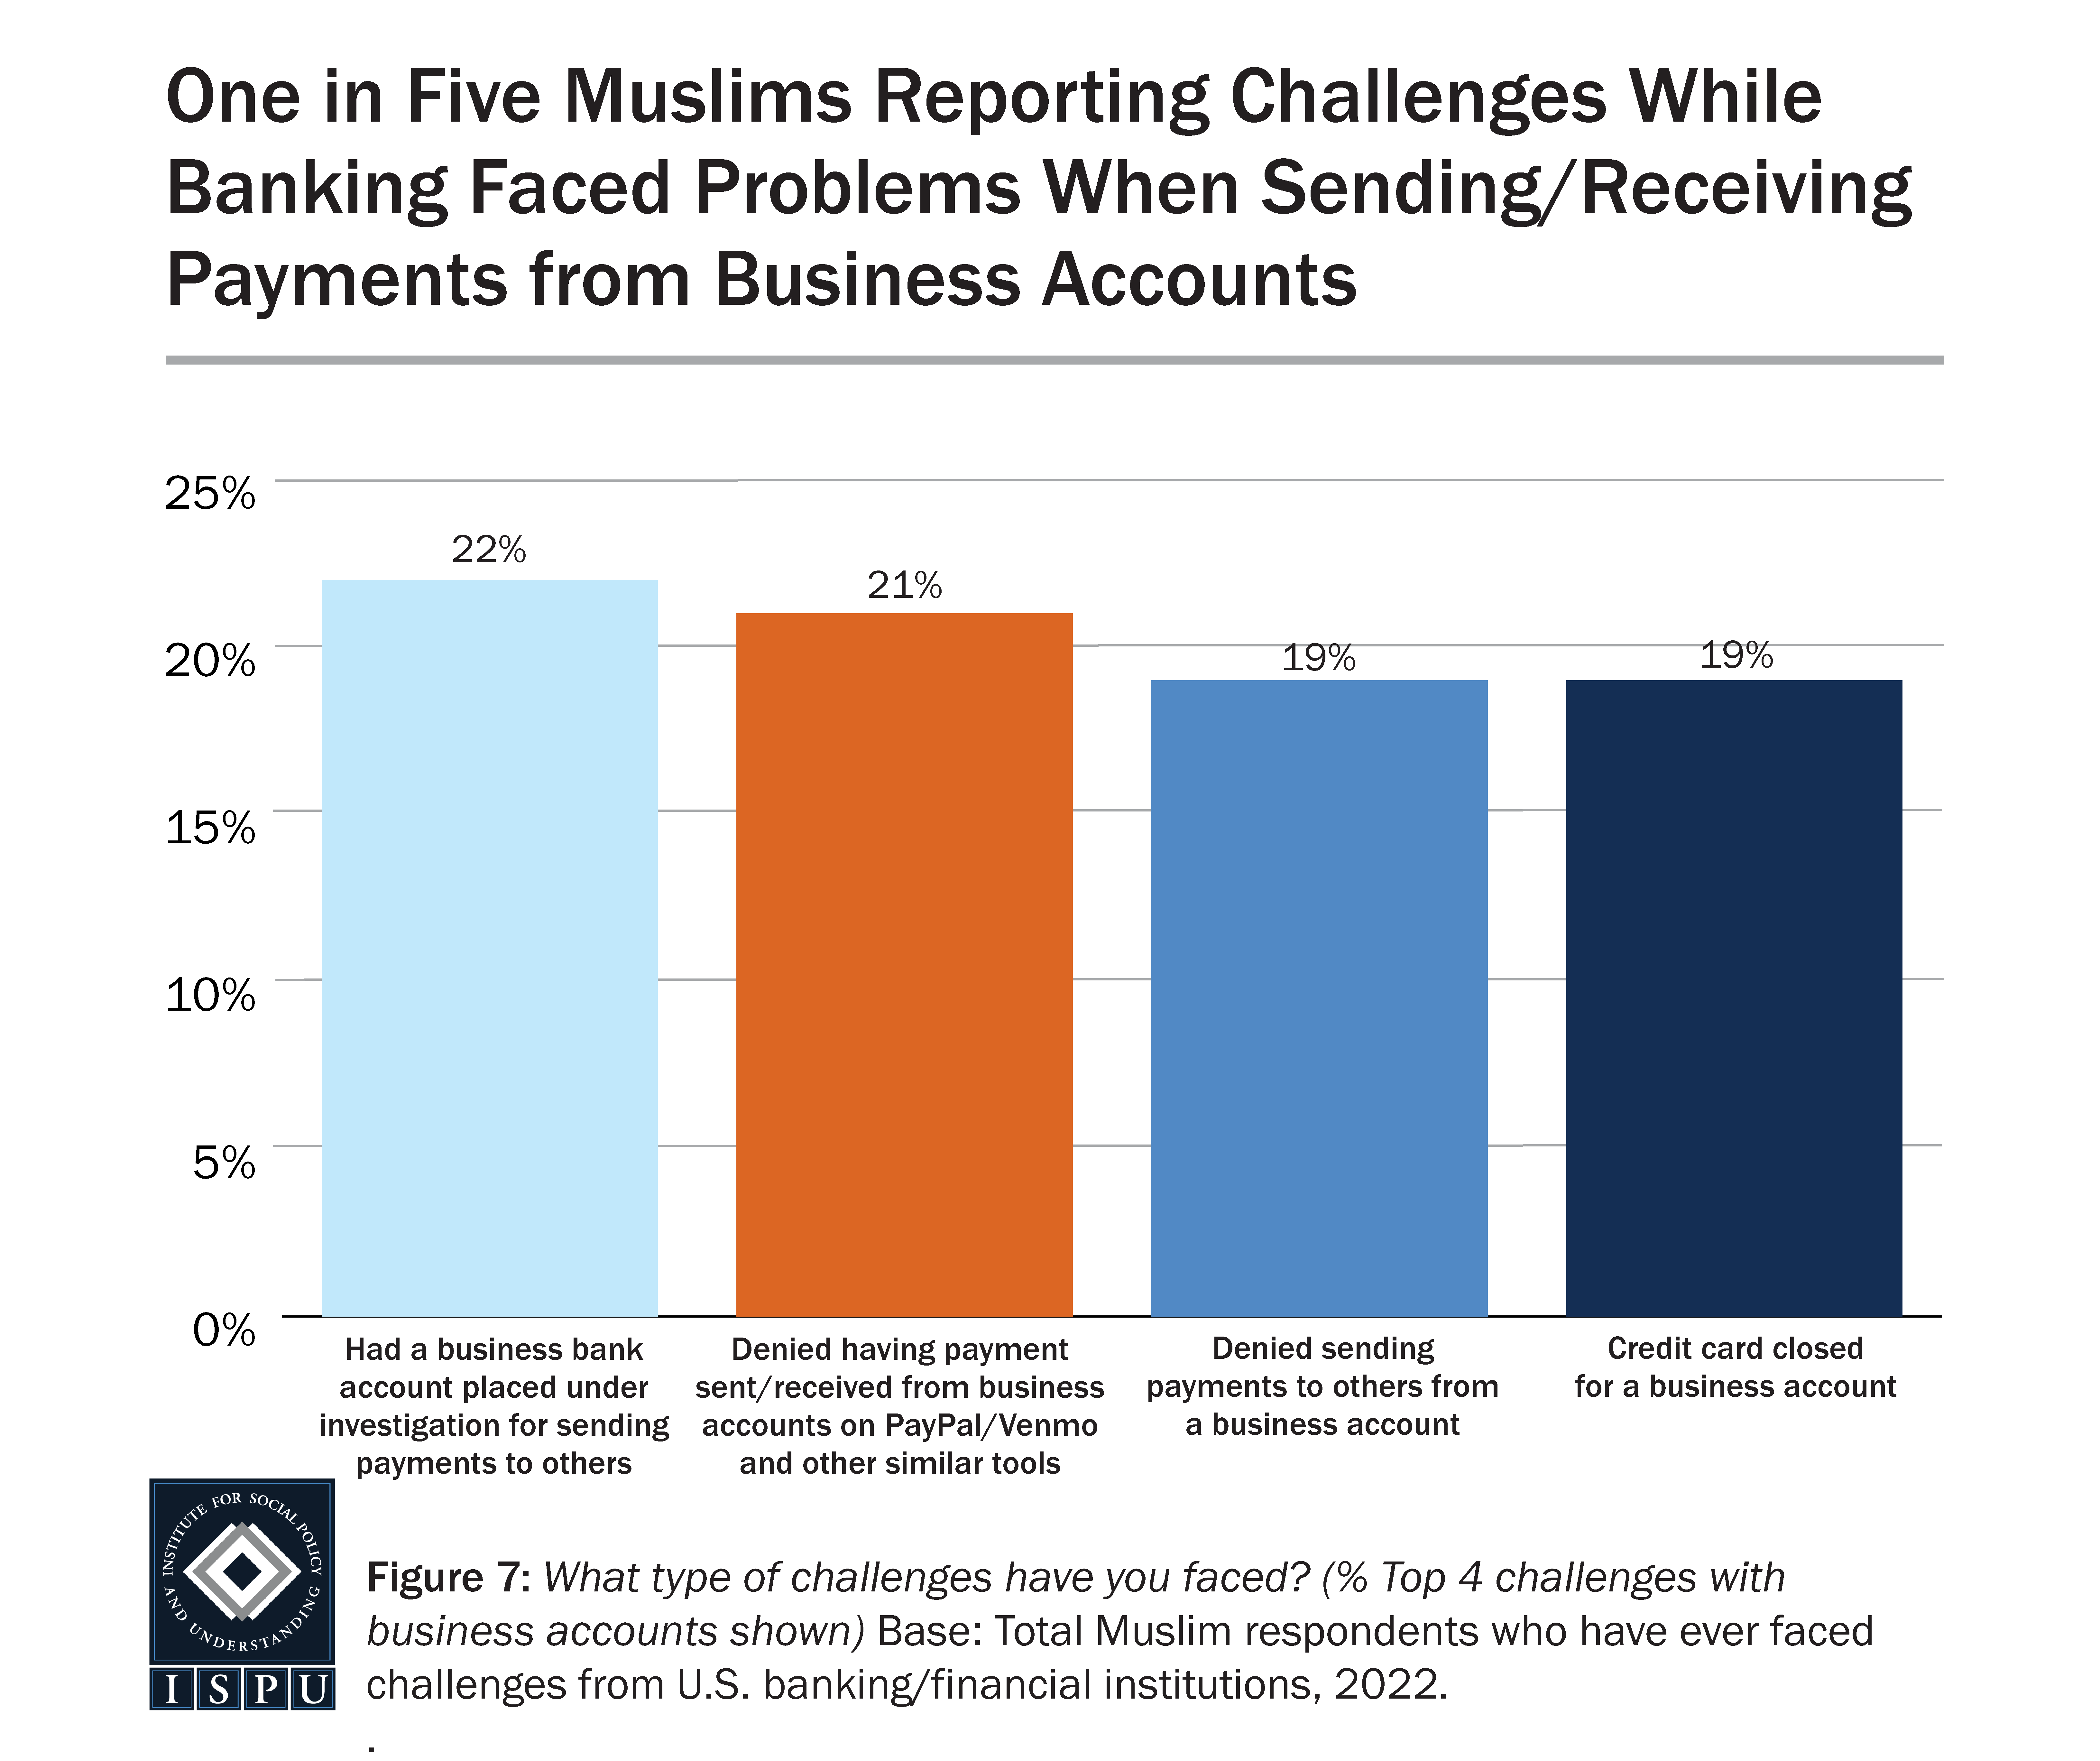 A bar graph showing the types of challenges faced with business accounts among Muslims who reported facing challenges while banking.